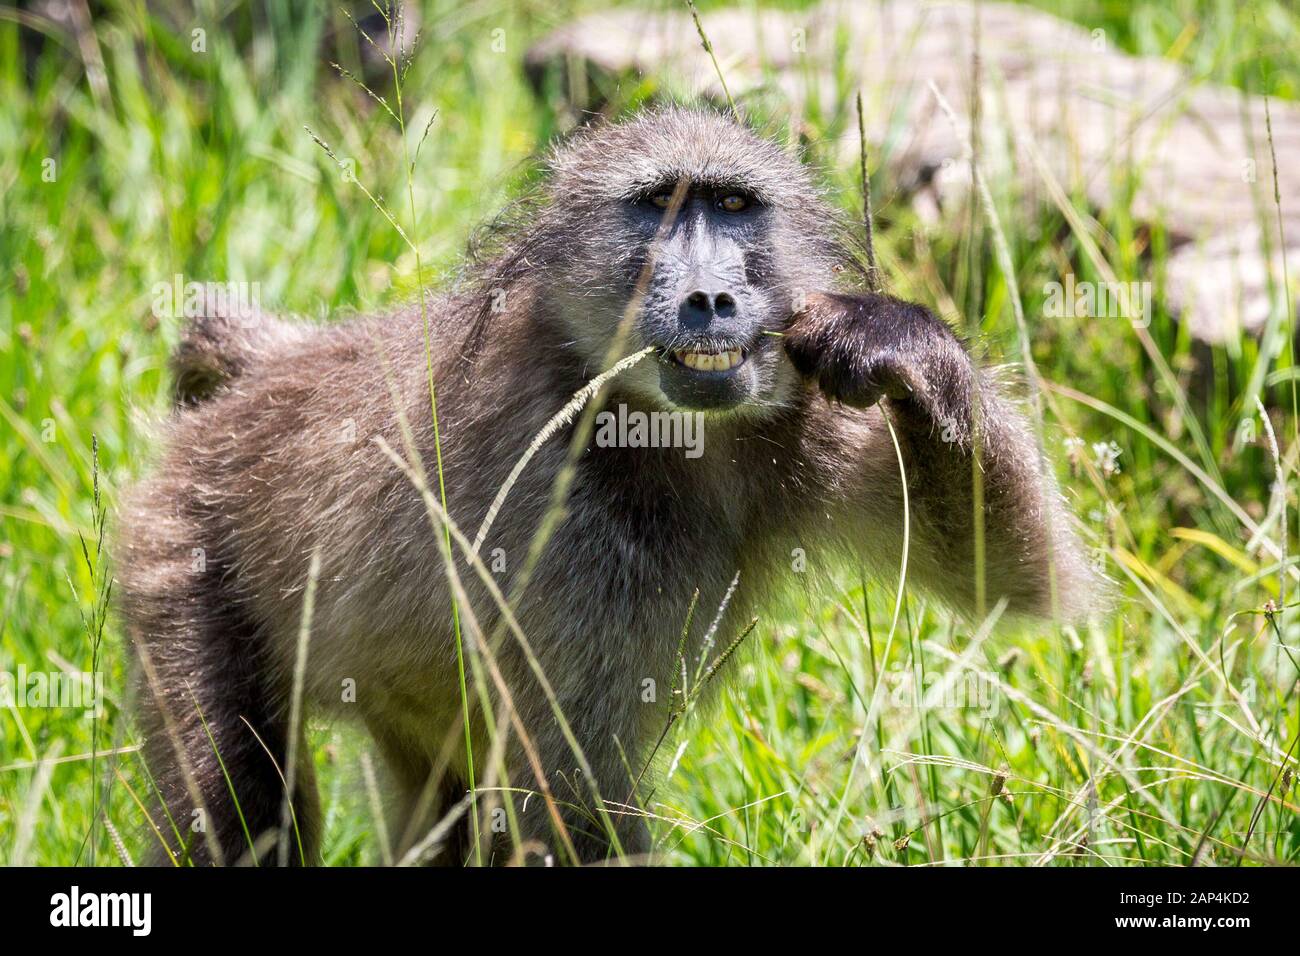 Close up of a Baboon grabbing a blade of grass with it's hand and eating the upper part of it, South Africa Stock Photo